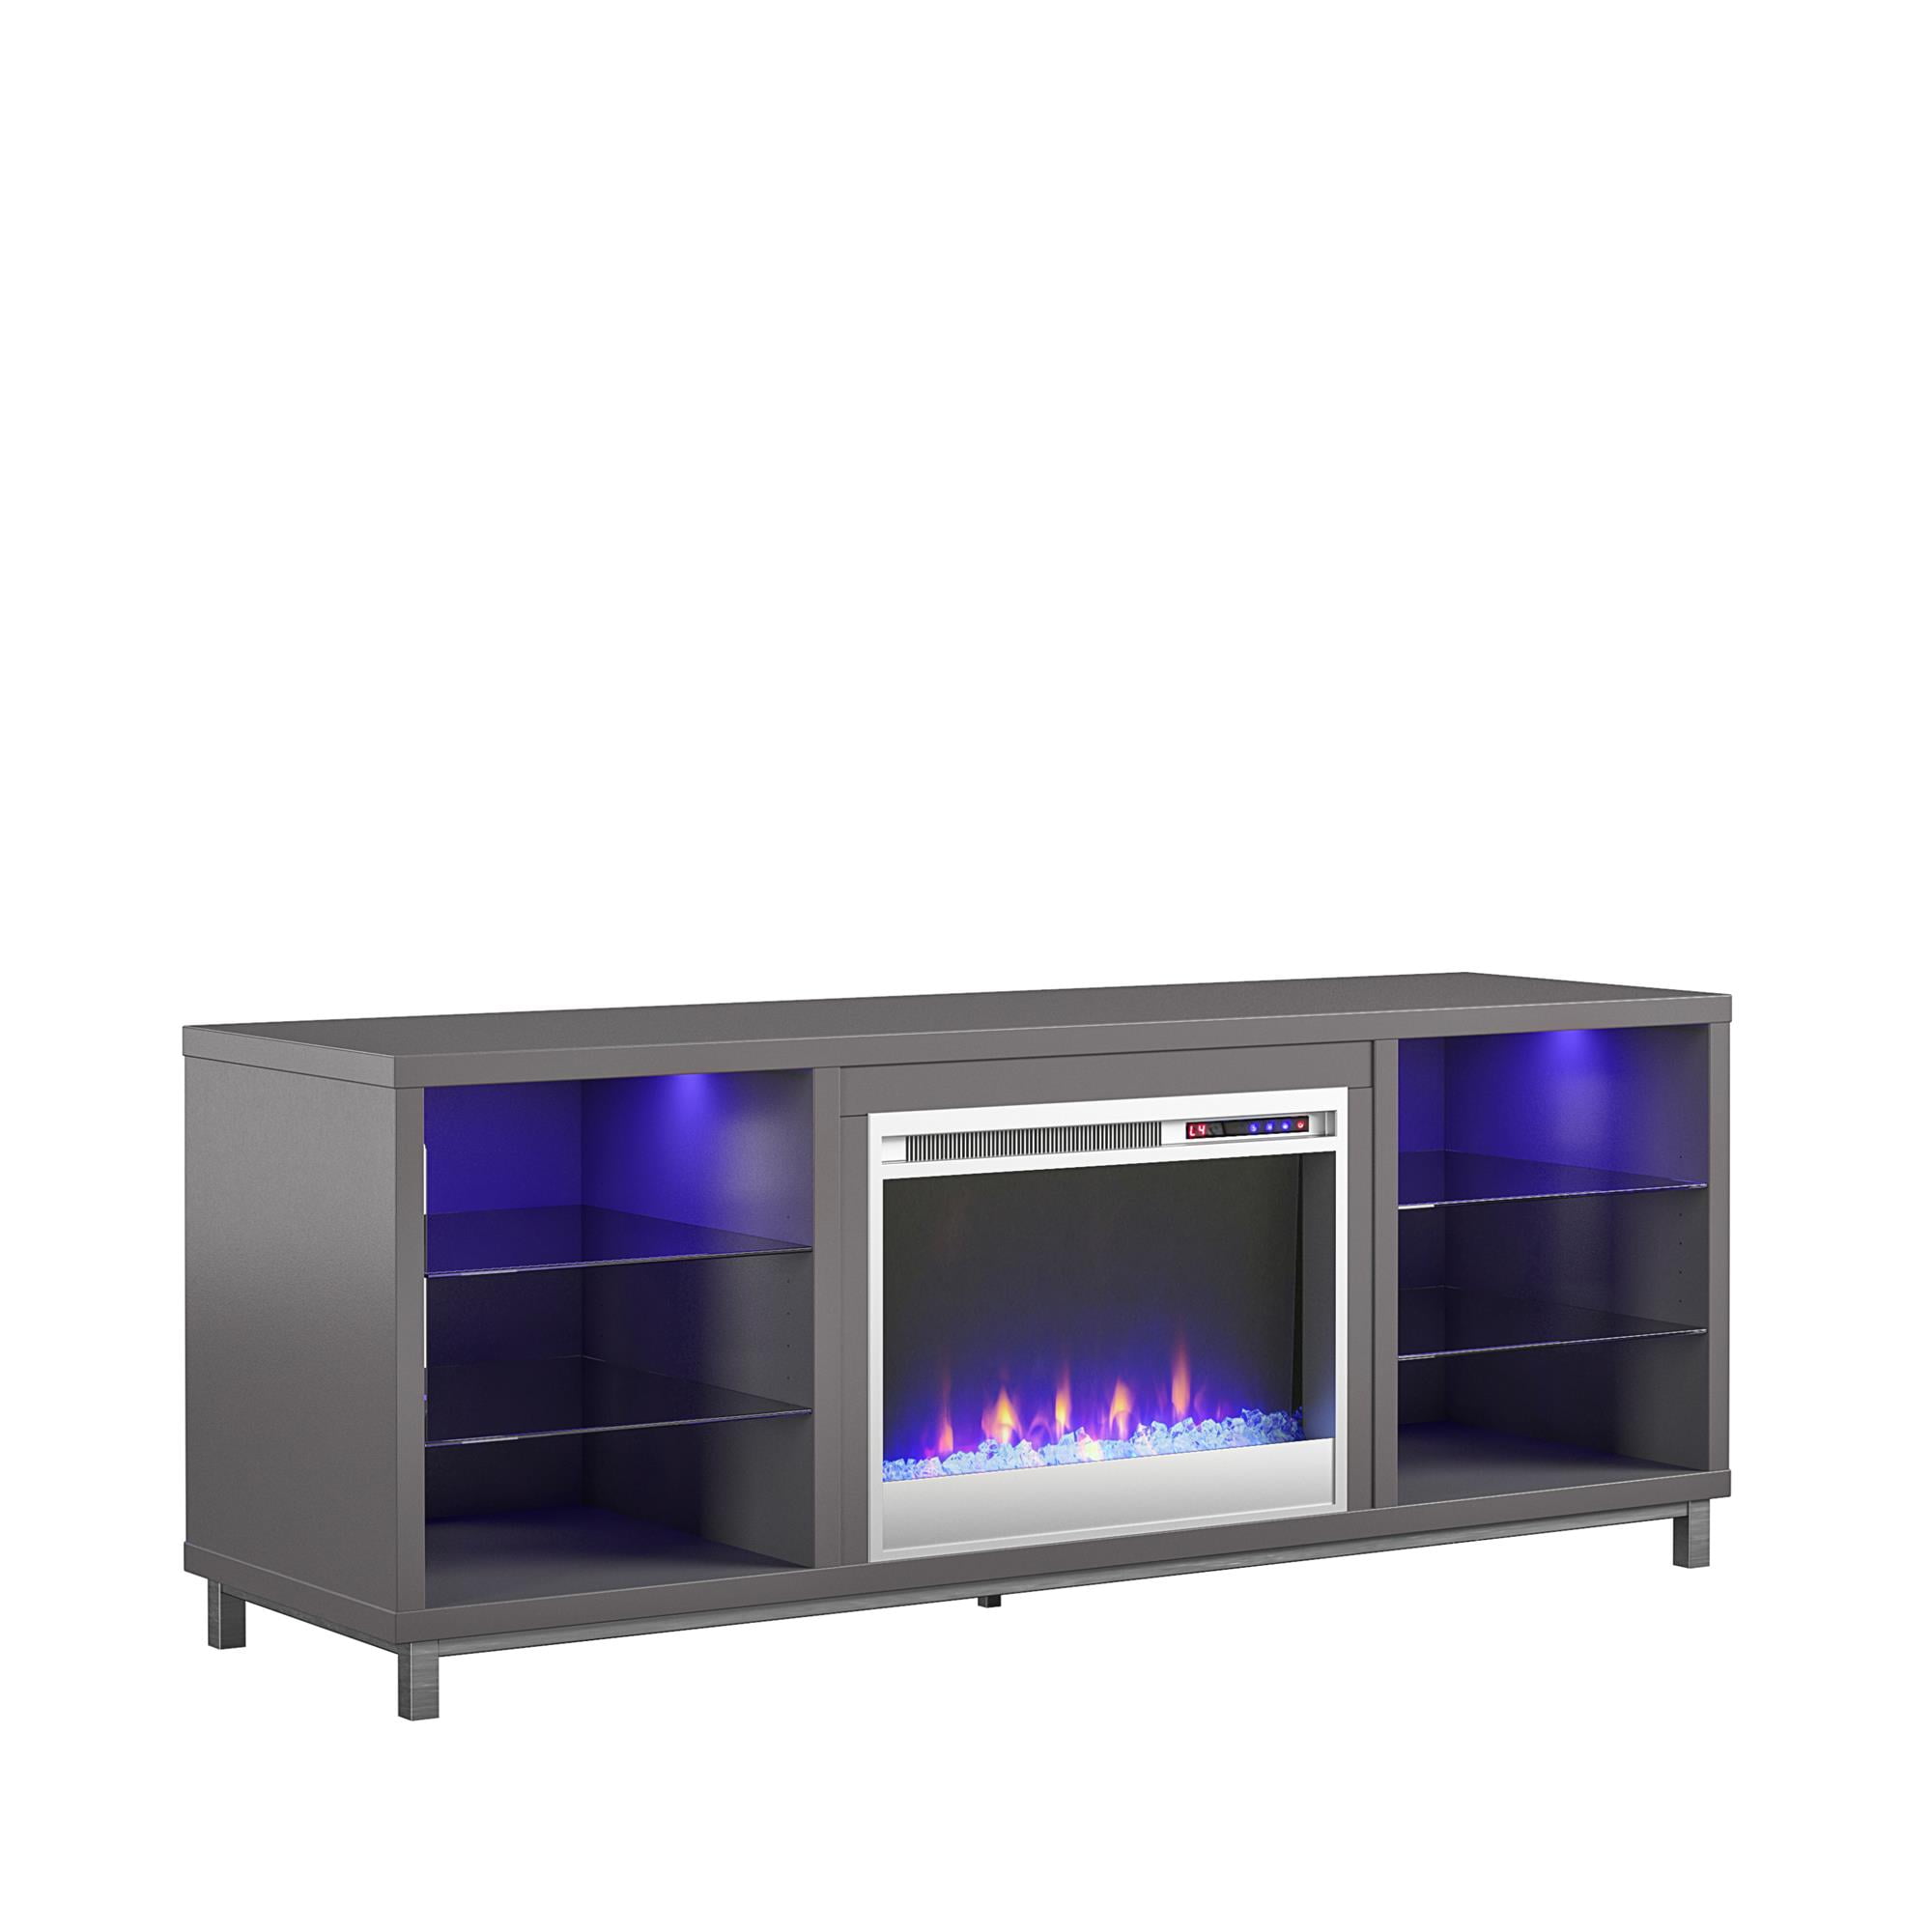 Ameriwood Lumina 70" Fireplace TV Stand Graphite for sale online 